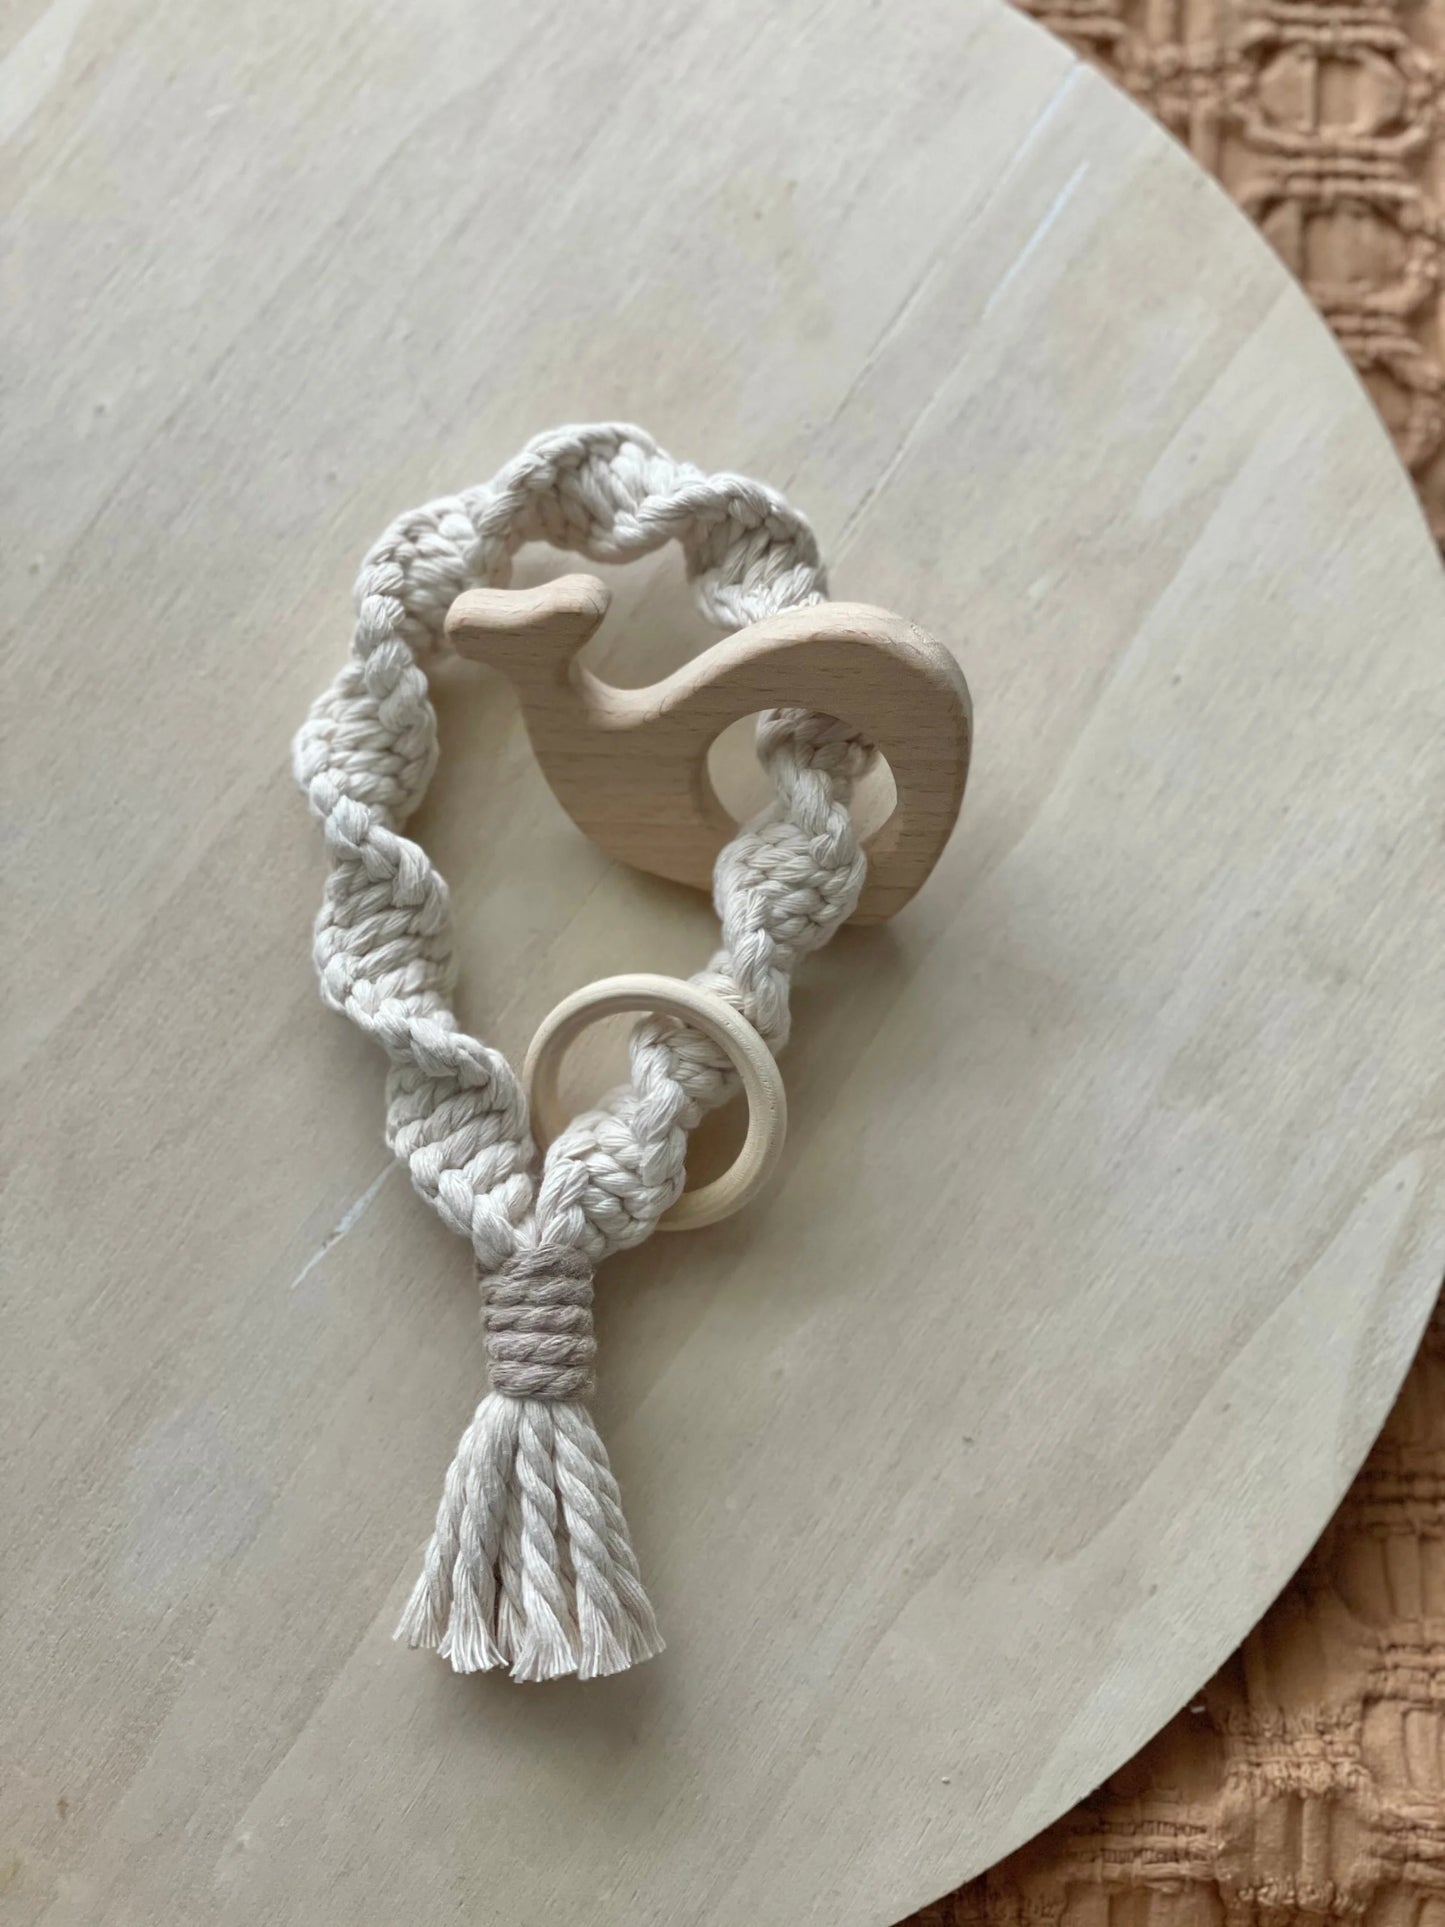 MACRAME BABY RATTLE TEETHER - NATURAL